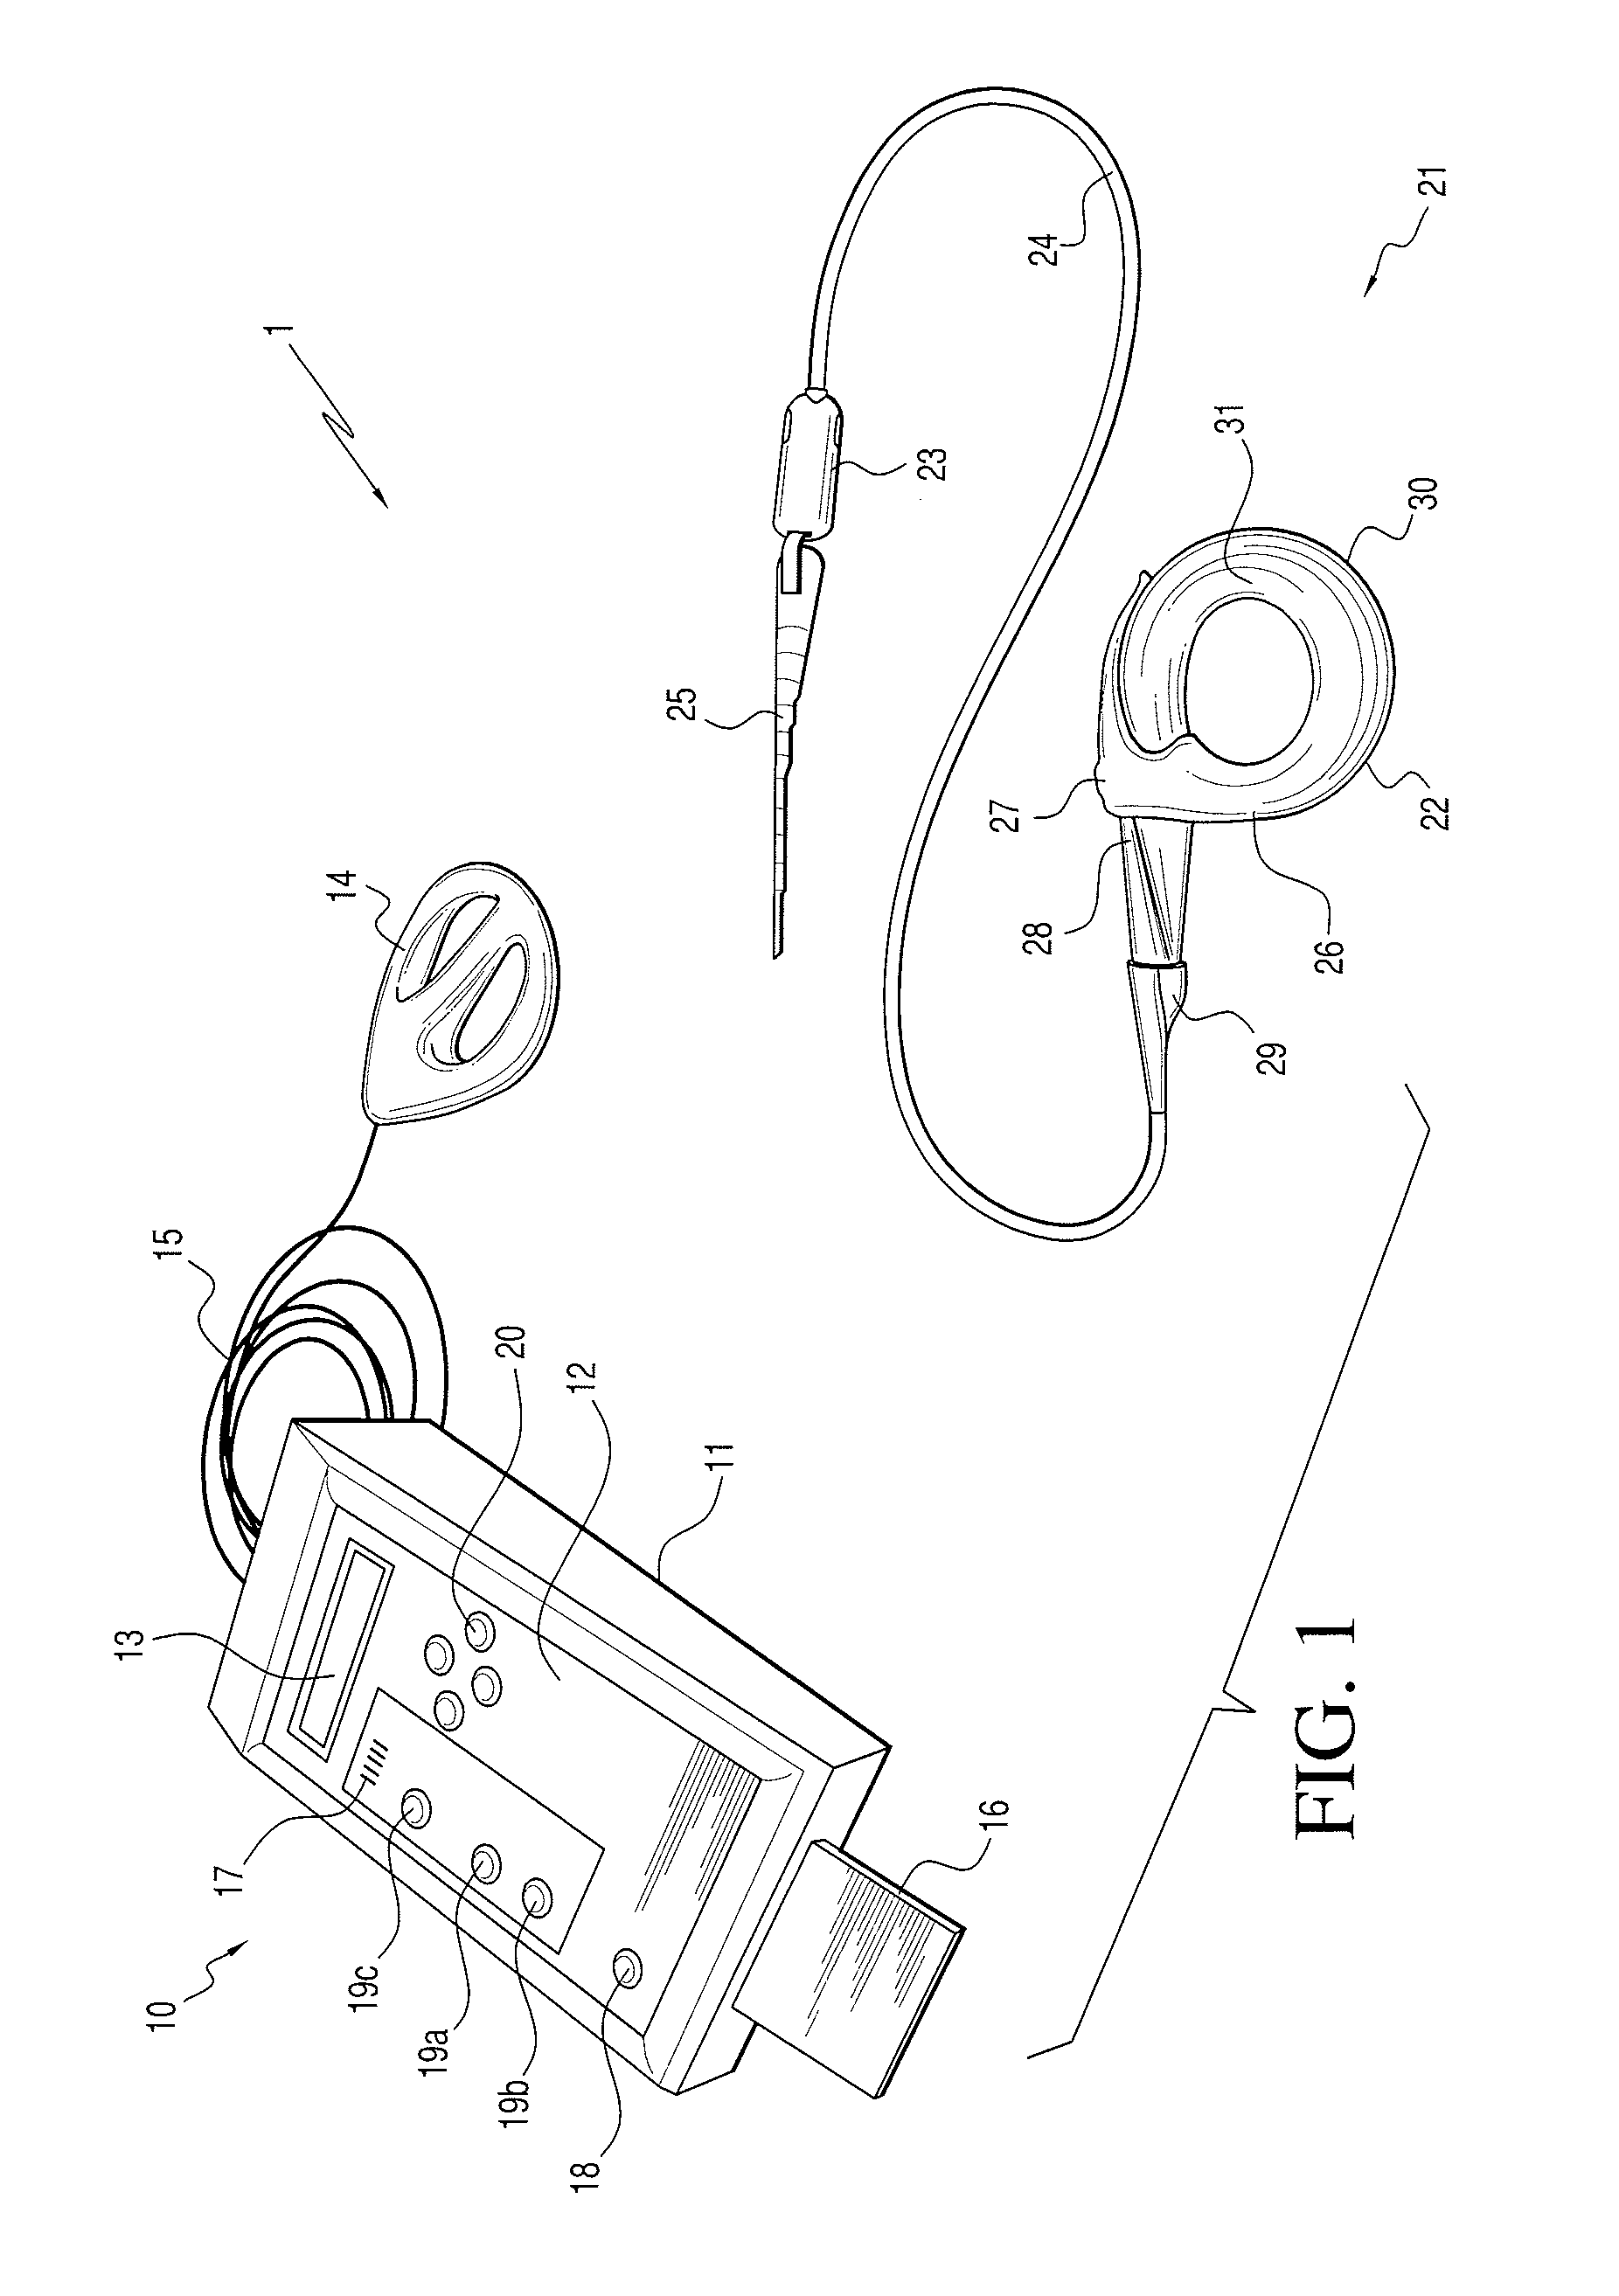 Symmetrical drive system for an implantable restriction device